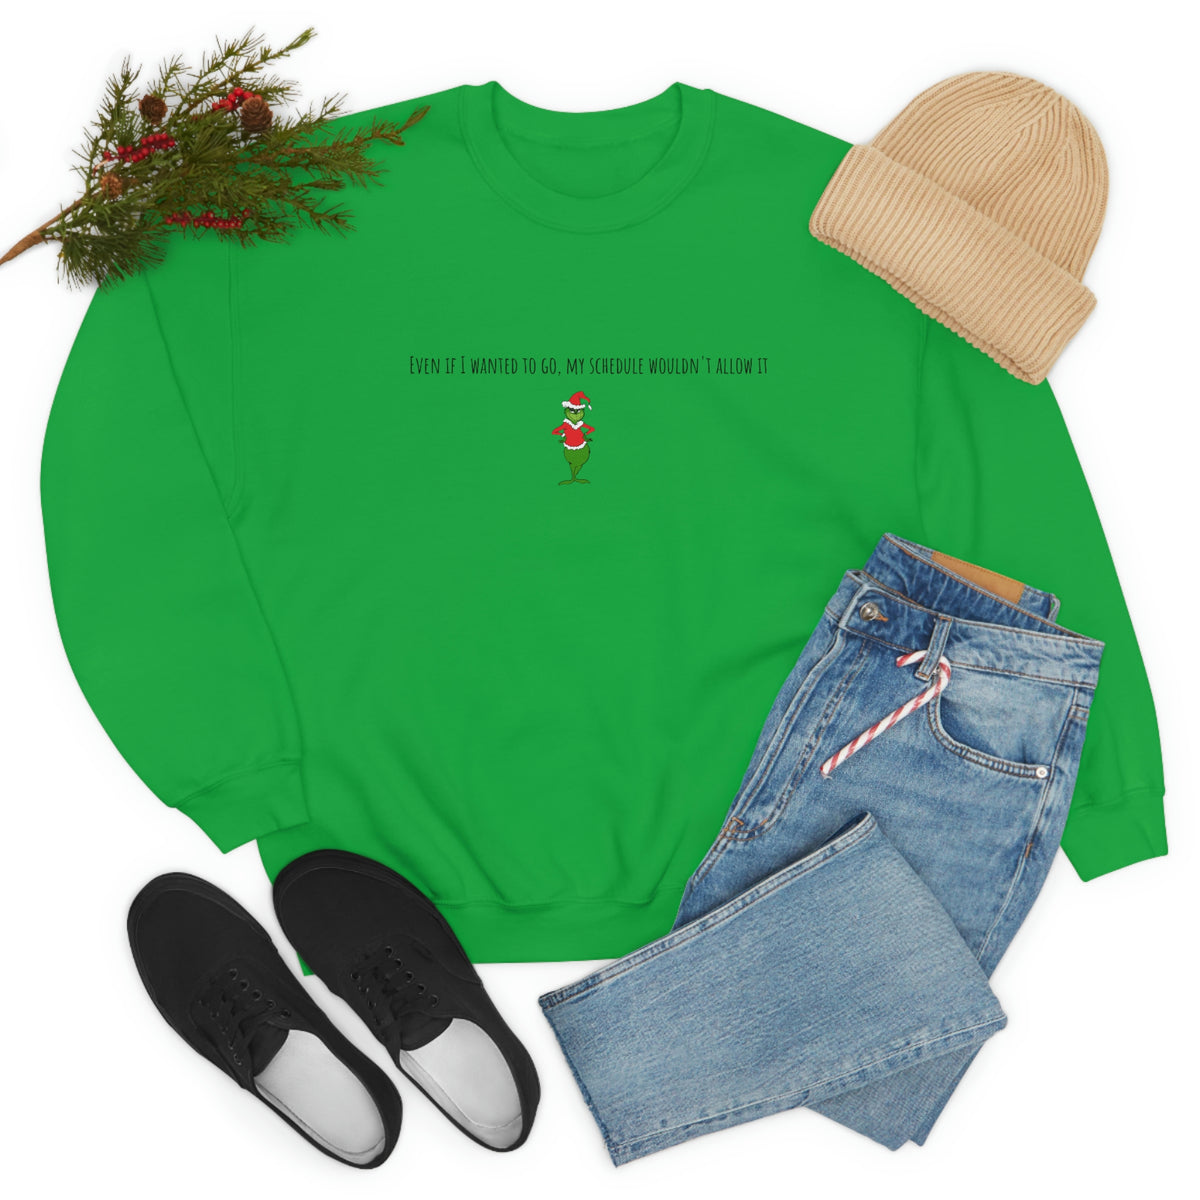 Copy of The Grinch Holiday Shirt, The Grinch Gift Pullover, do not publish